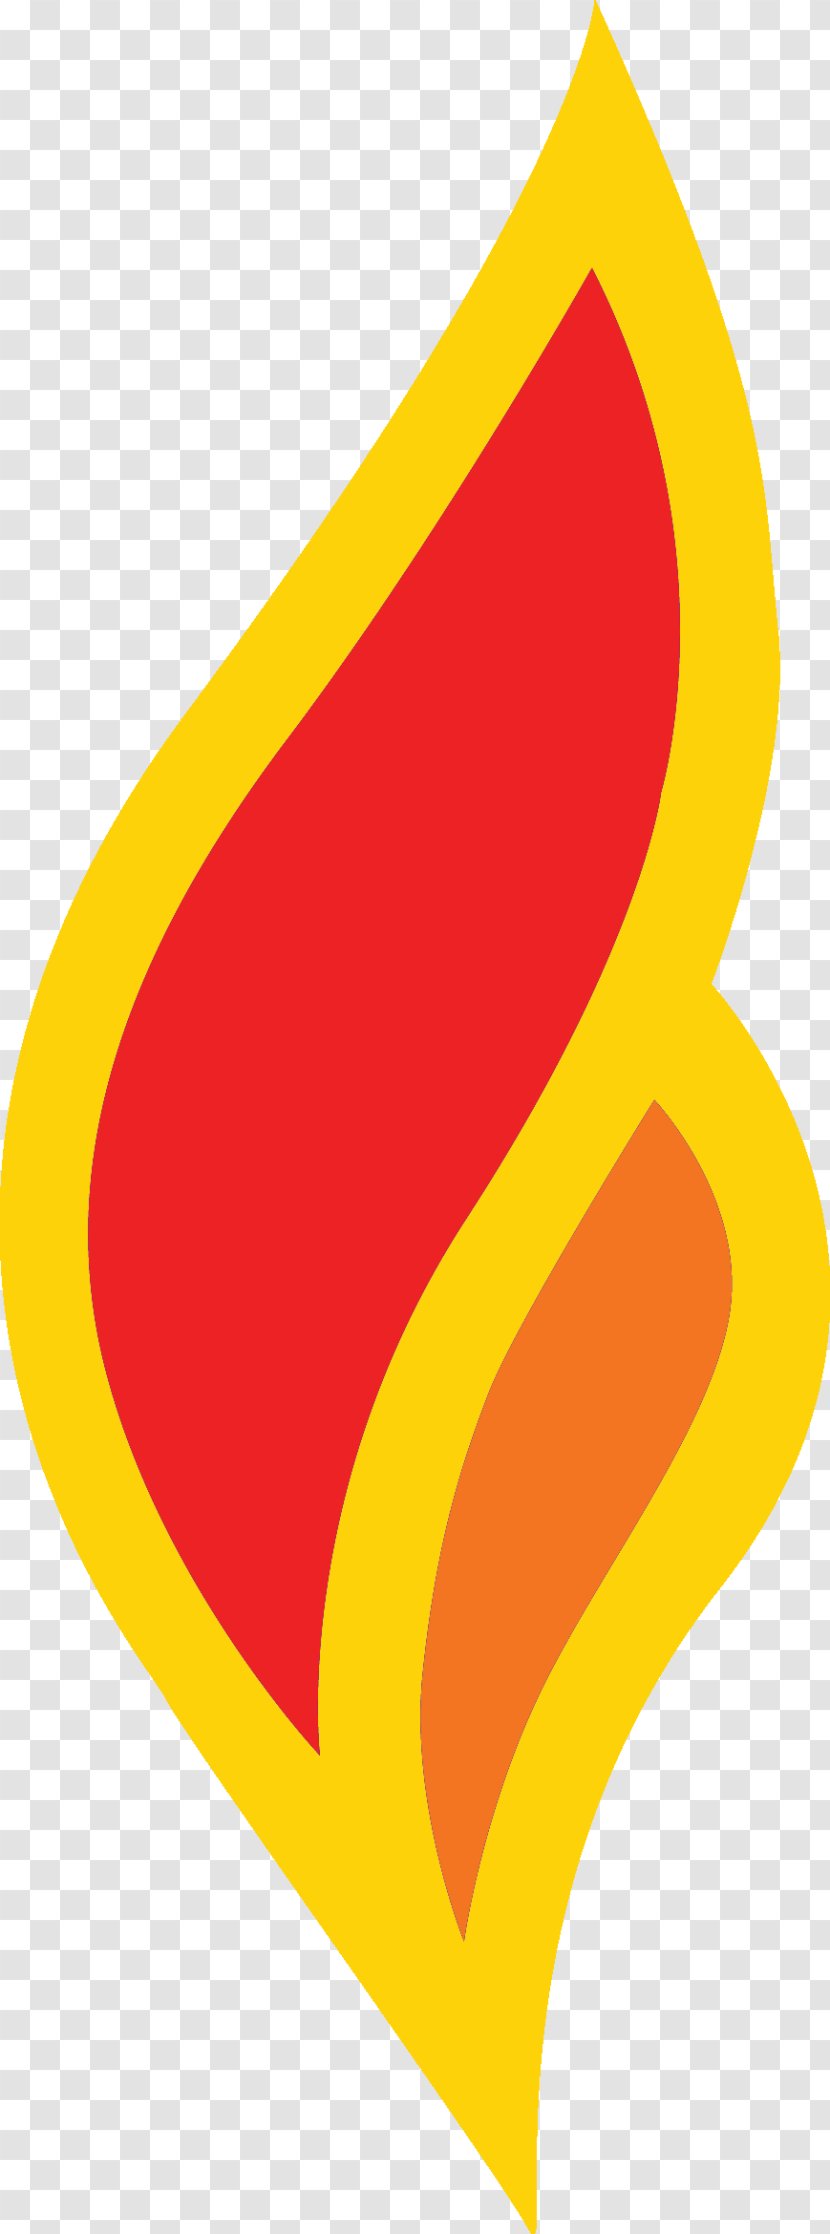 2014 South American Games Brand Marketing Workweek And Weekend Logo - Google Search - Flames Cliparts Transparent PNG